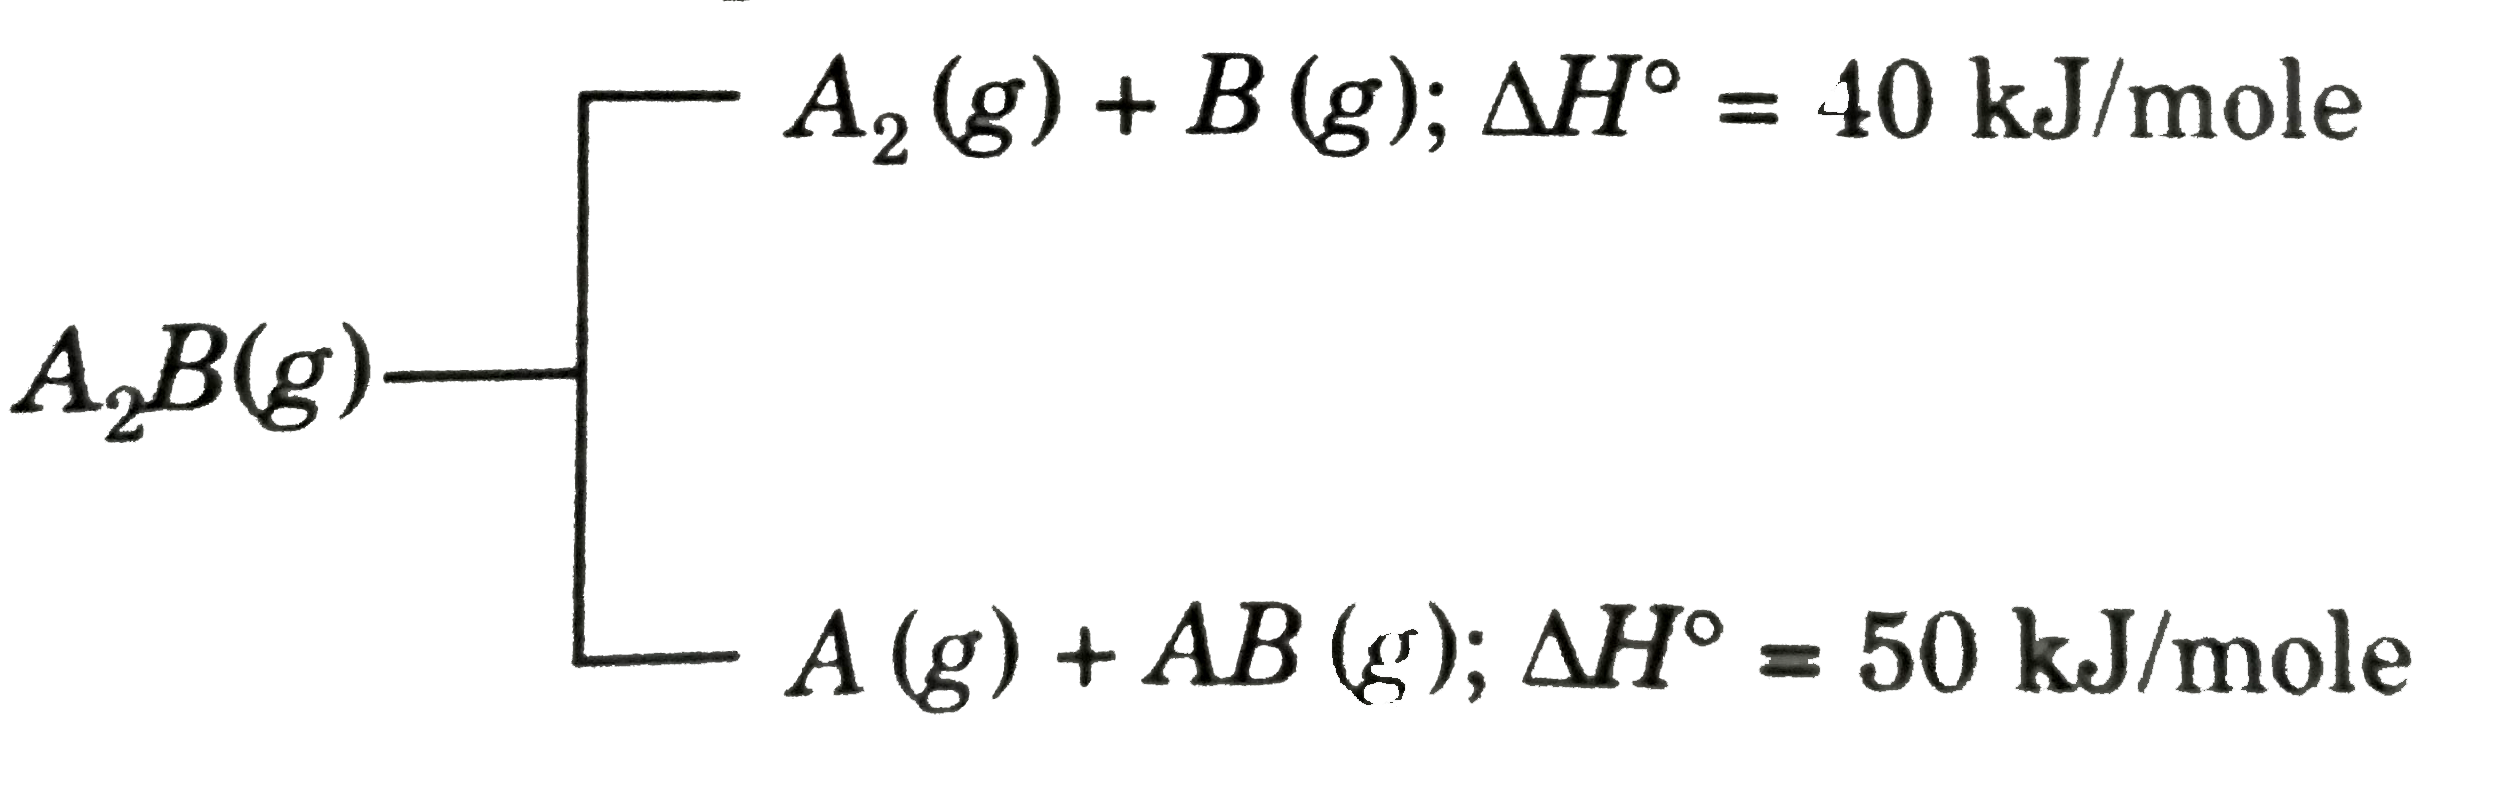 Substance A(2)B(g) can undergo decomposition to form of set of products :      if the molar ratio of A(2)(g) to A(g) is 5 : 3 in a set of product gases, then energy involved in the decomposition of 1 mole of A(2)B is :